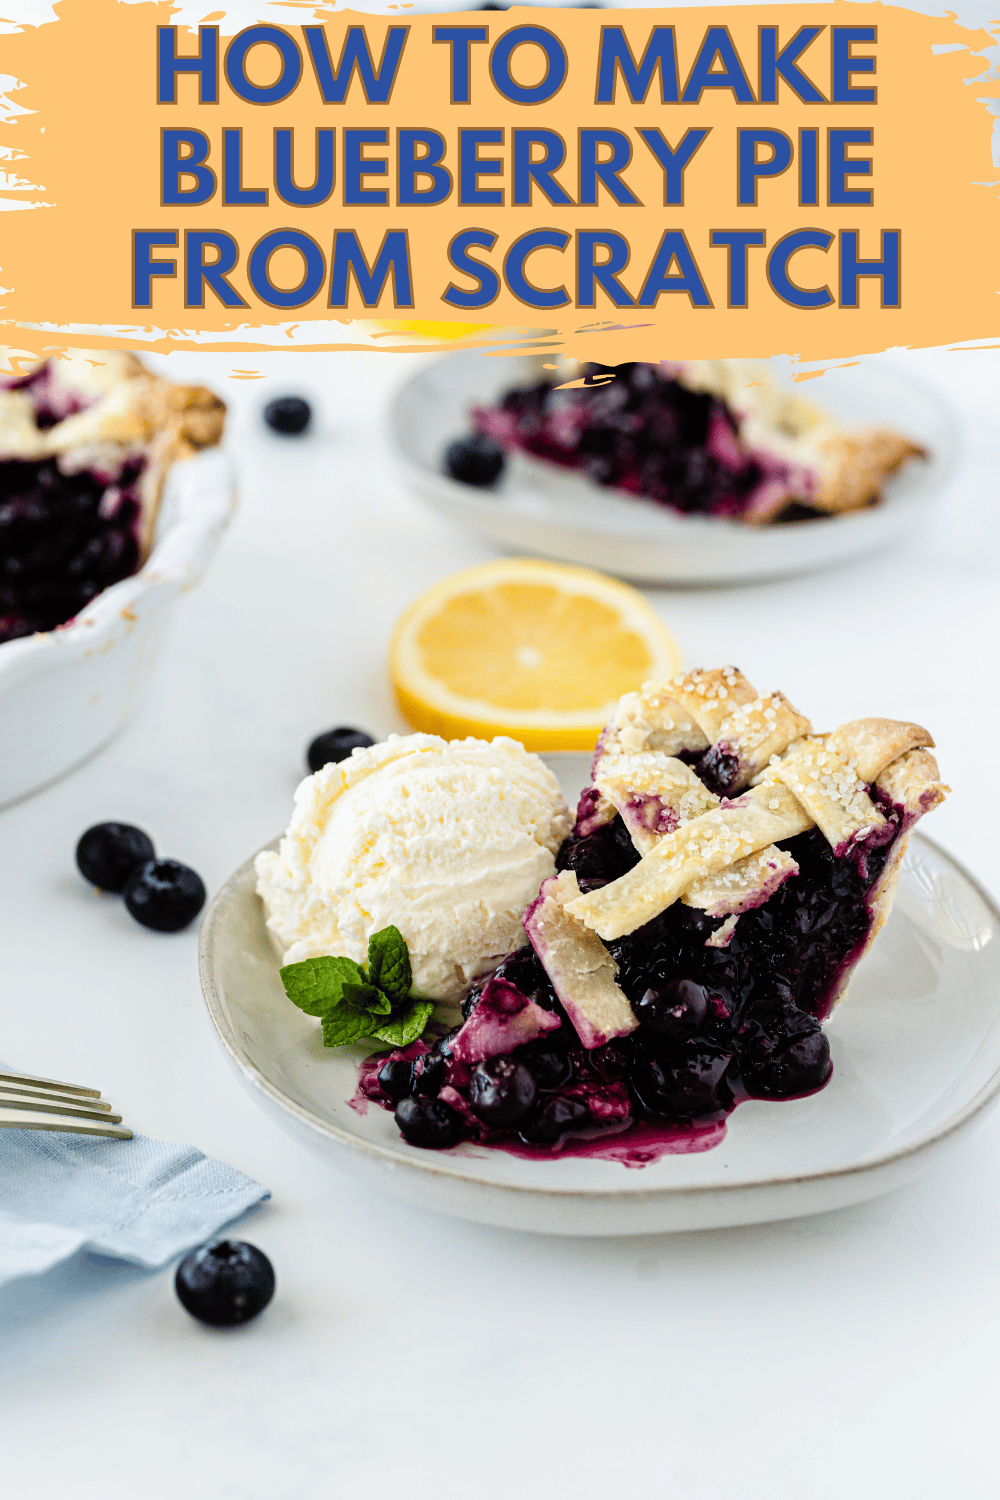  a slice of fresh blueberry pie next to a scoop of vanilla ice cream on a glass plate next to blueberries and a slice of lemon